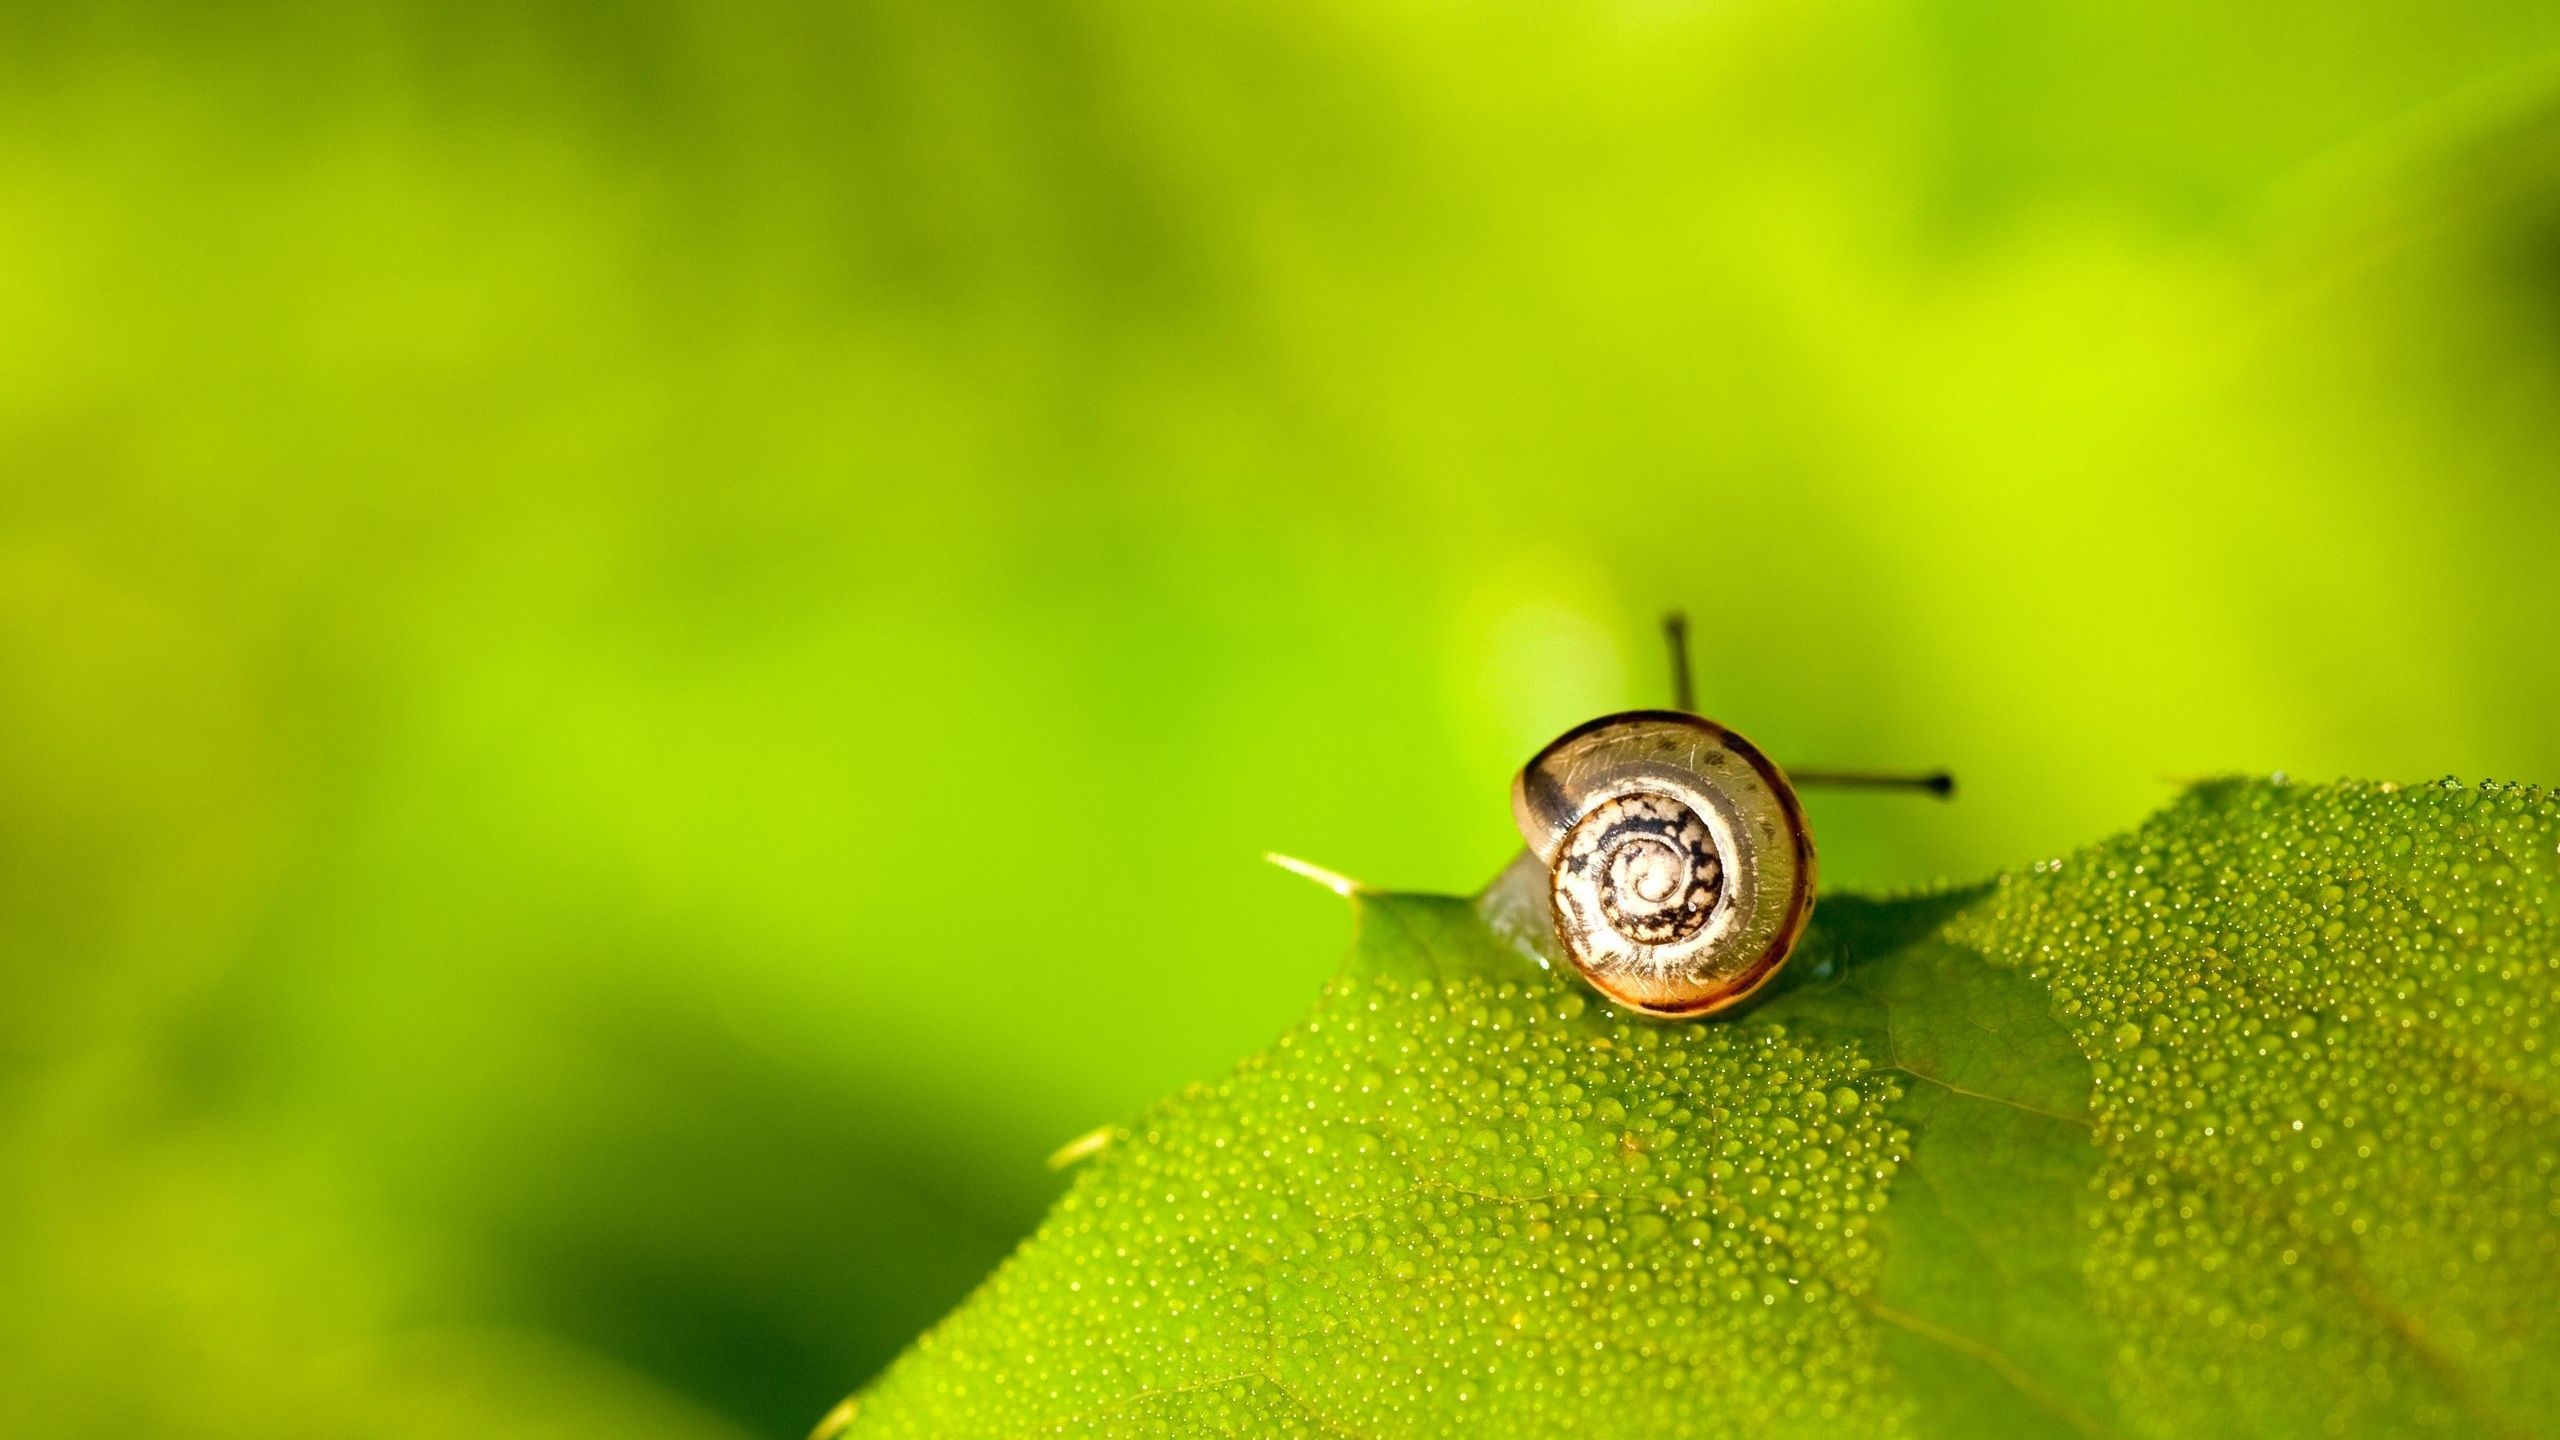 HD wallpaper, Cute, Pictures, Snail